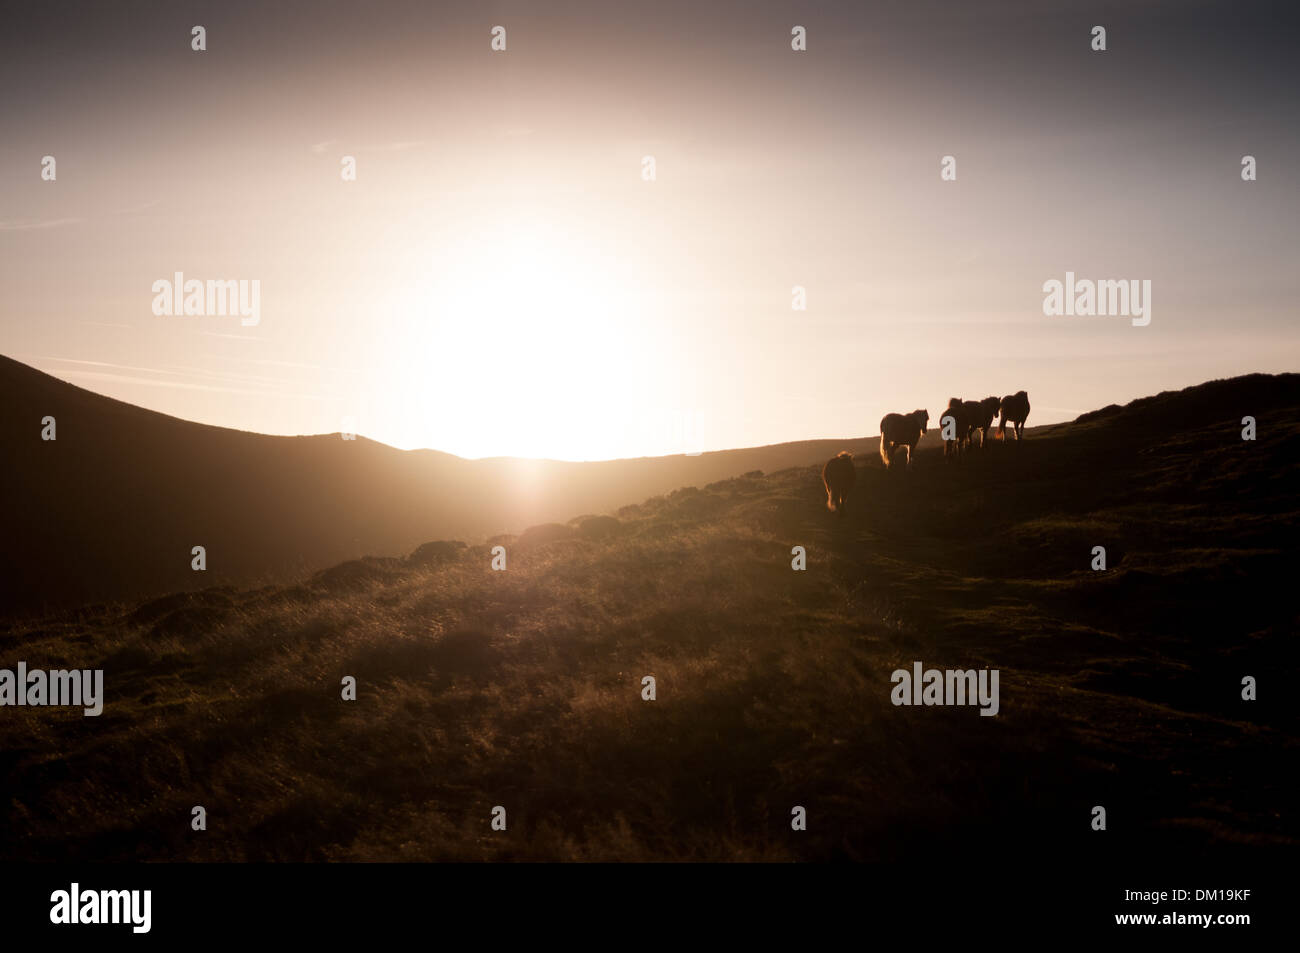 Wild horses trotting up the hill against the sunset at Cardingmill Valley, Long Mynd, Shropshire, England Stock Photo